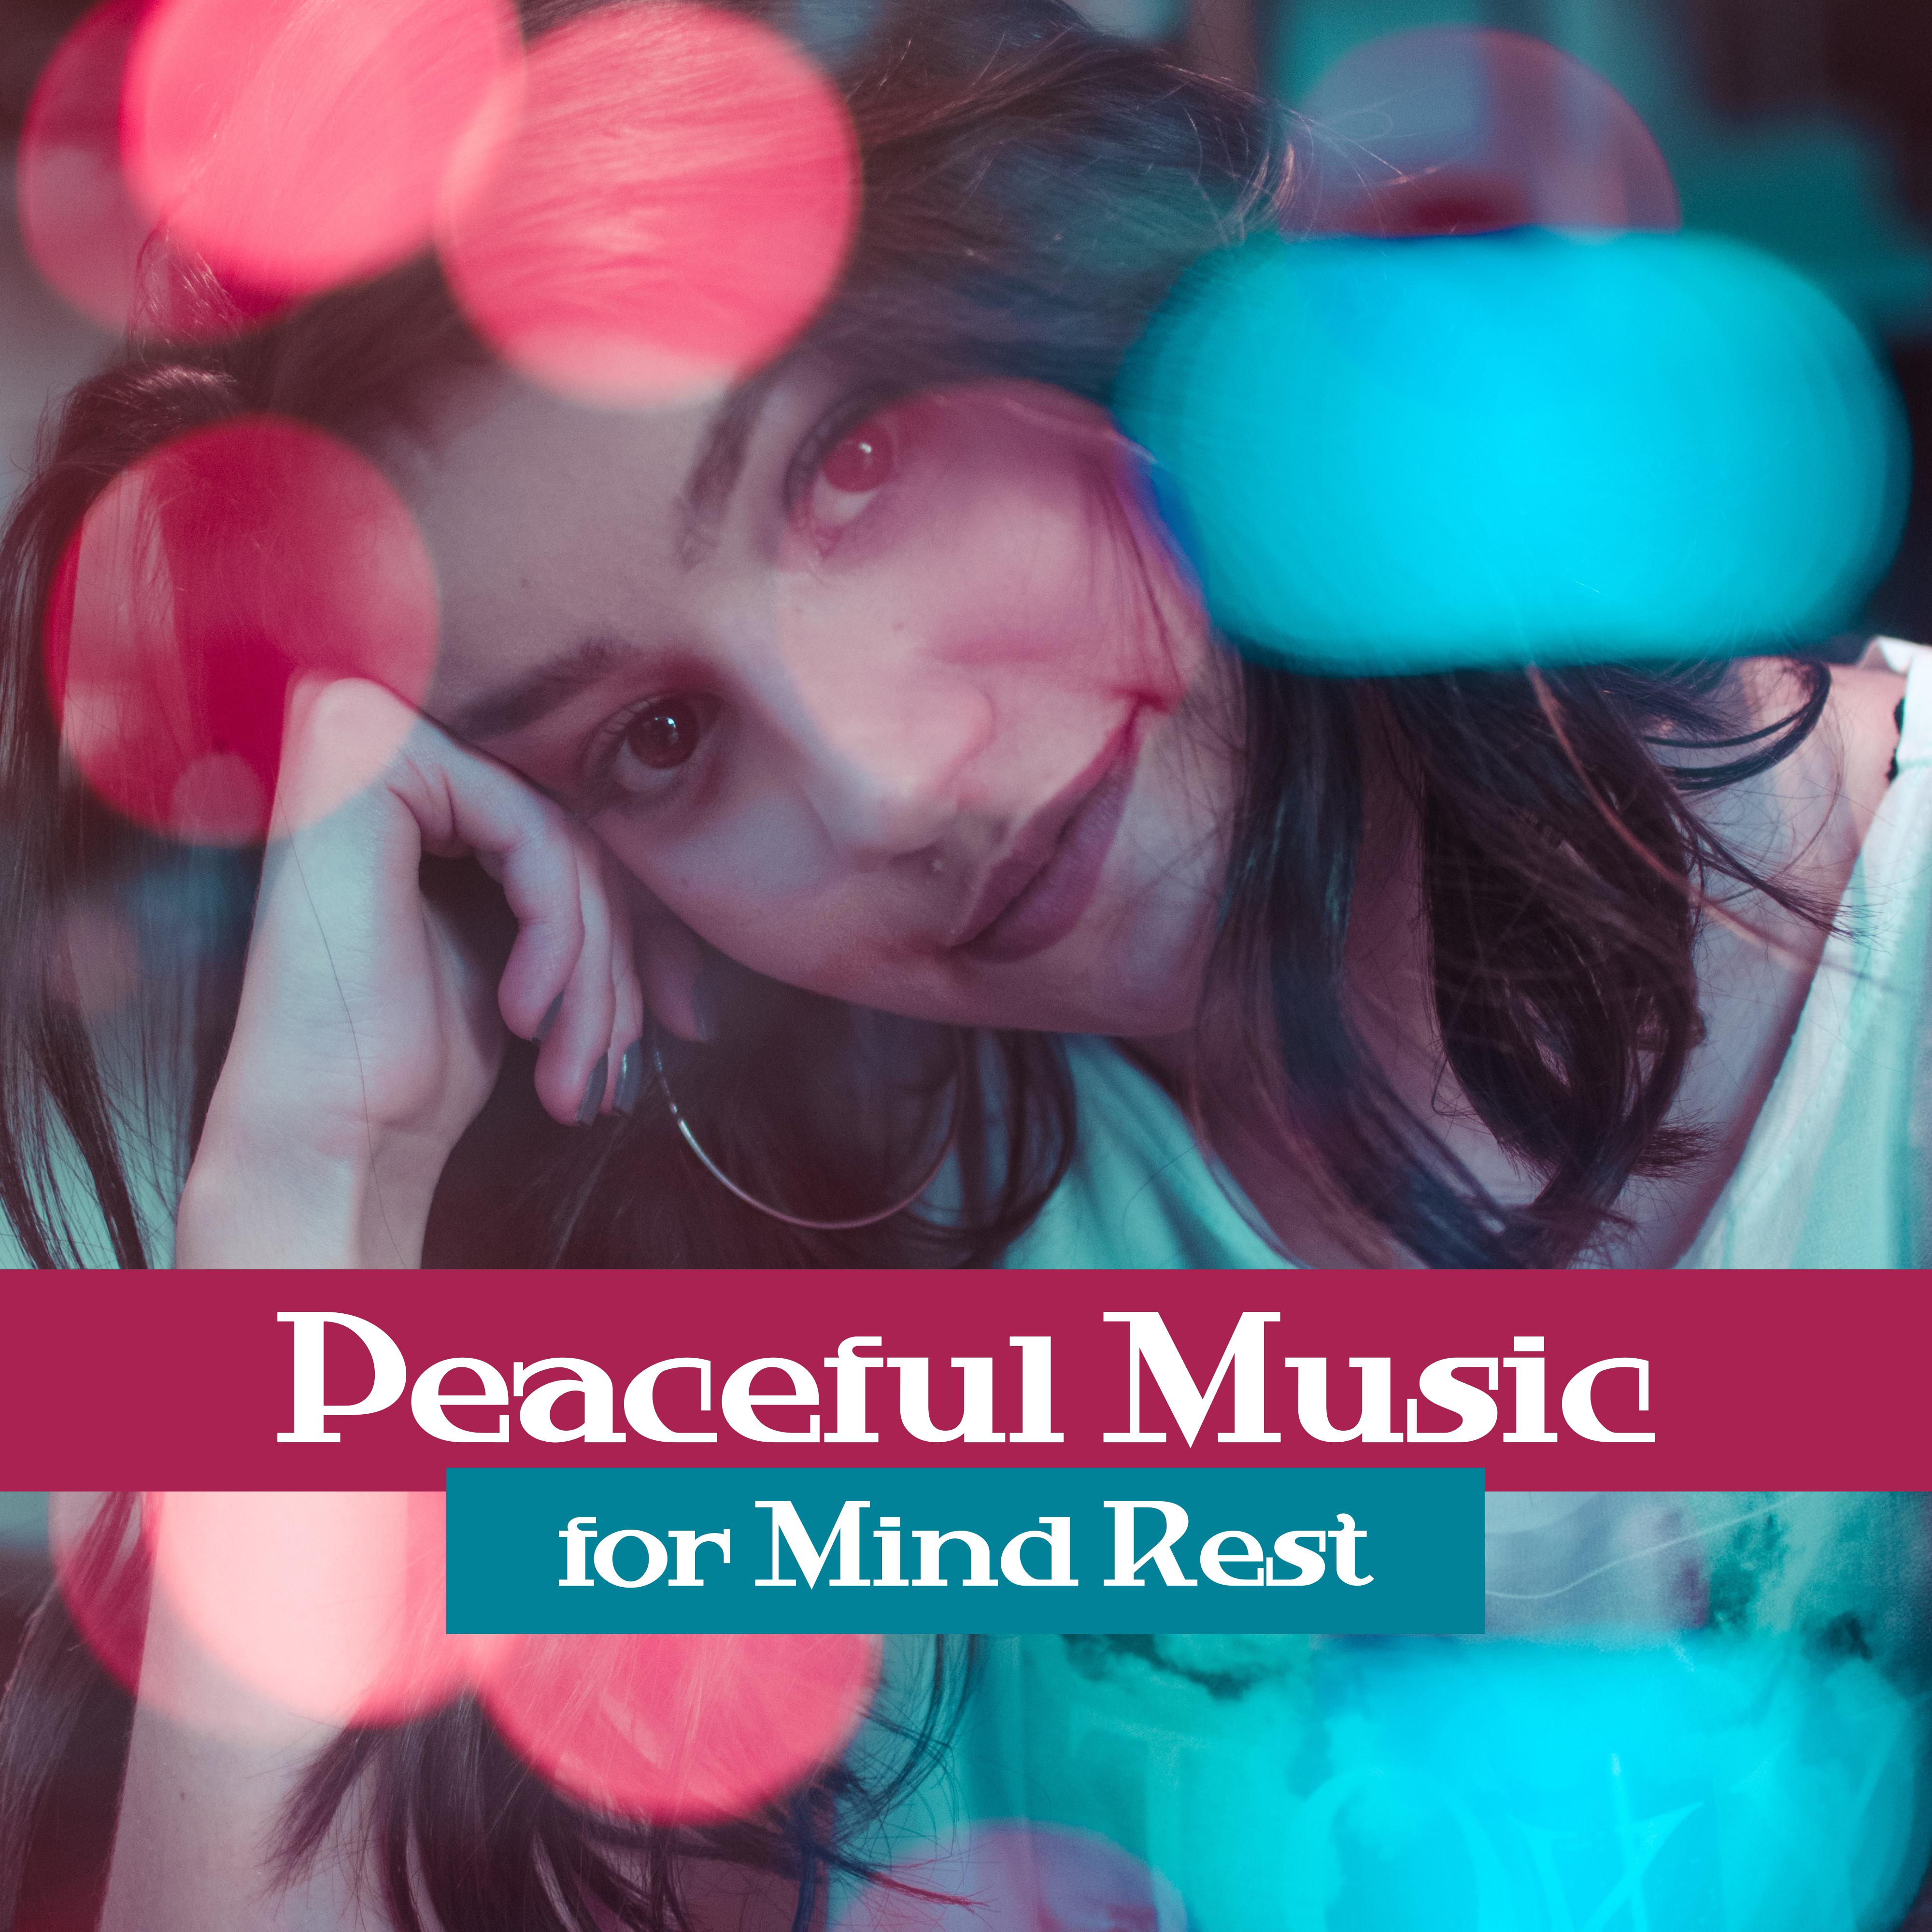 Peaceful Music for Mind Rest  Easy Listening, Stress Relief, Mind Relaxation, Healing Therapy